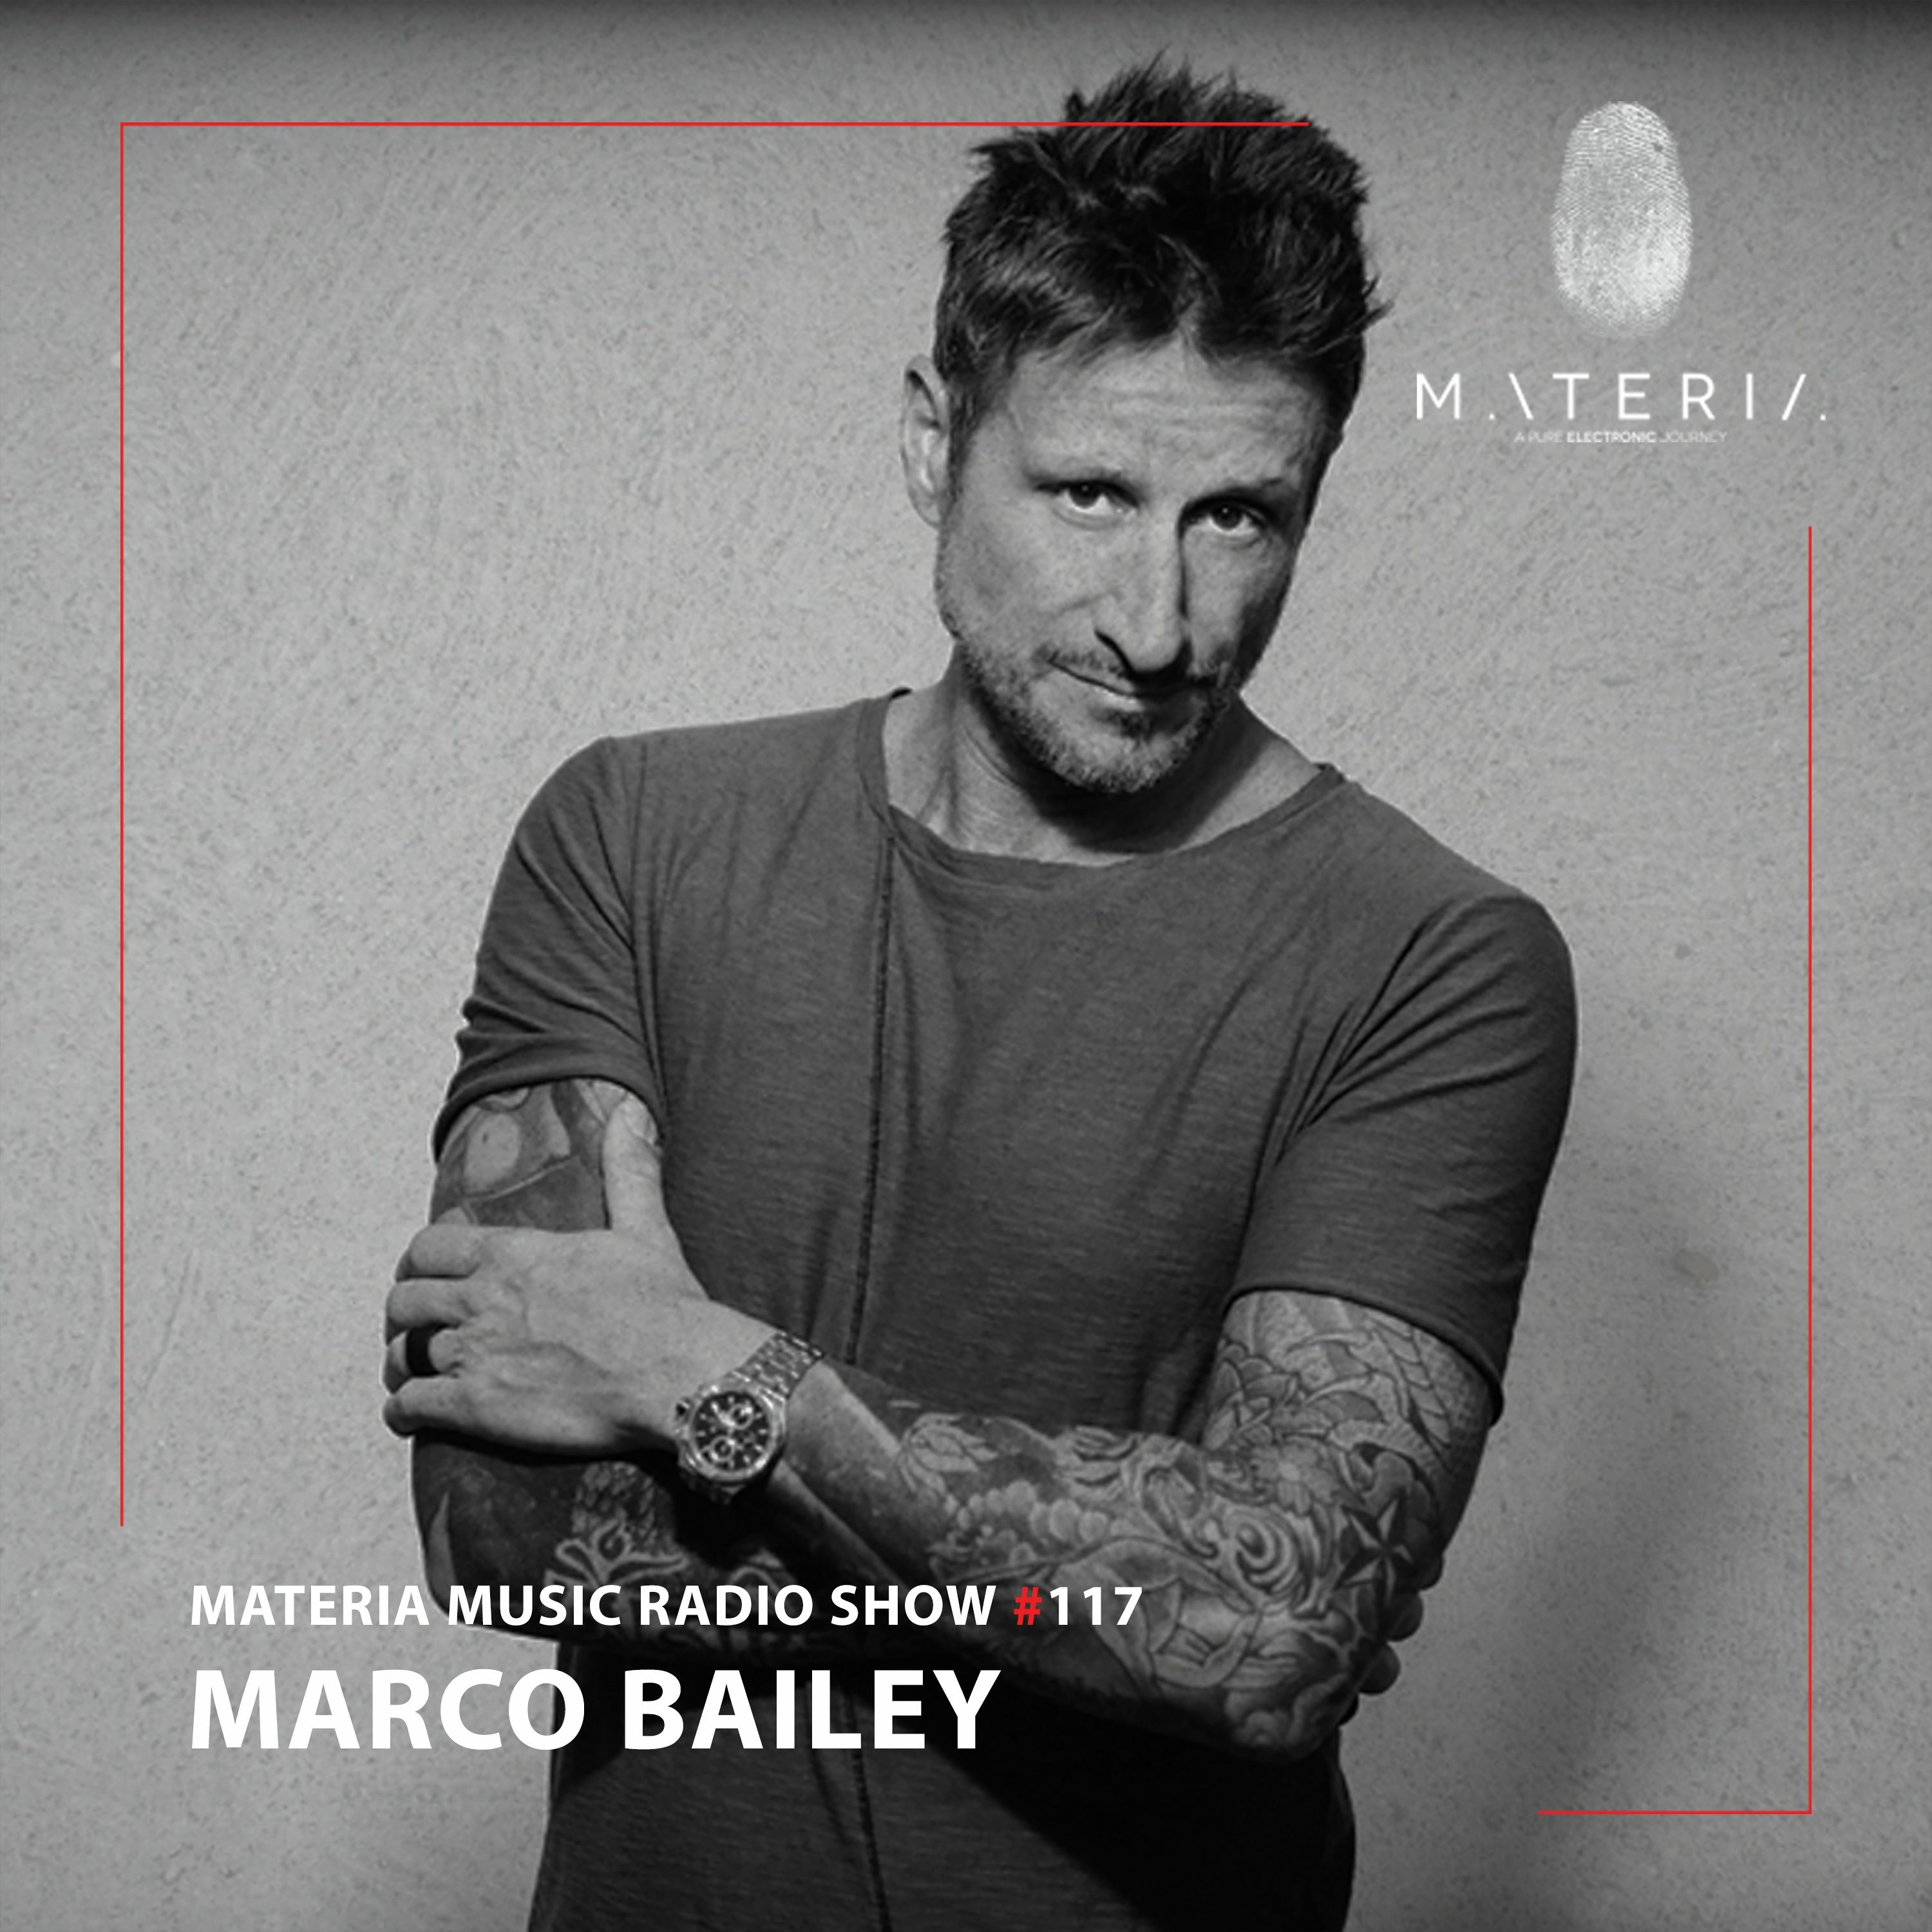 MATERIA Music Radio Show 117 with Marco Bailey